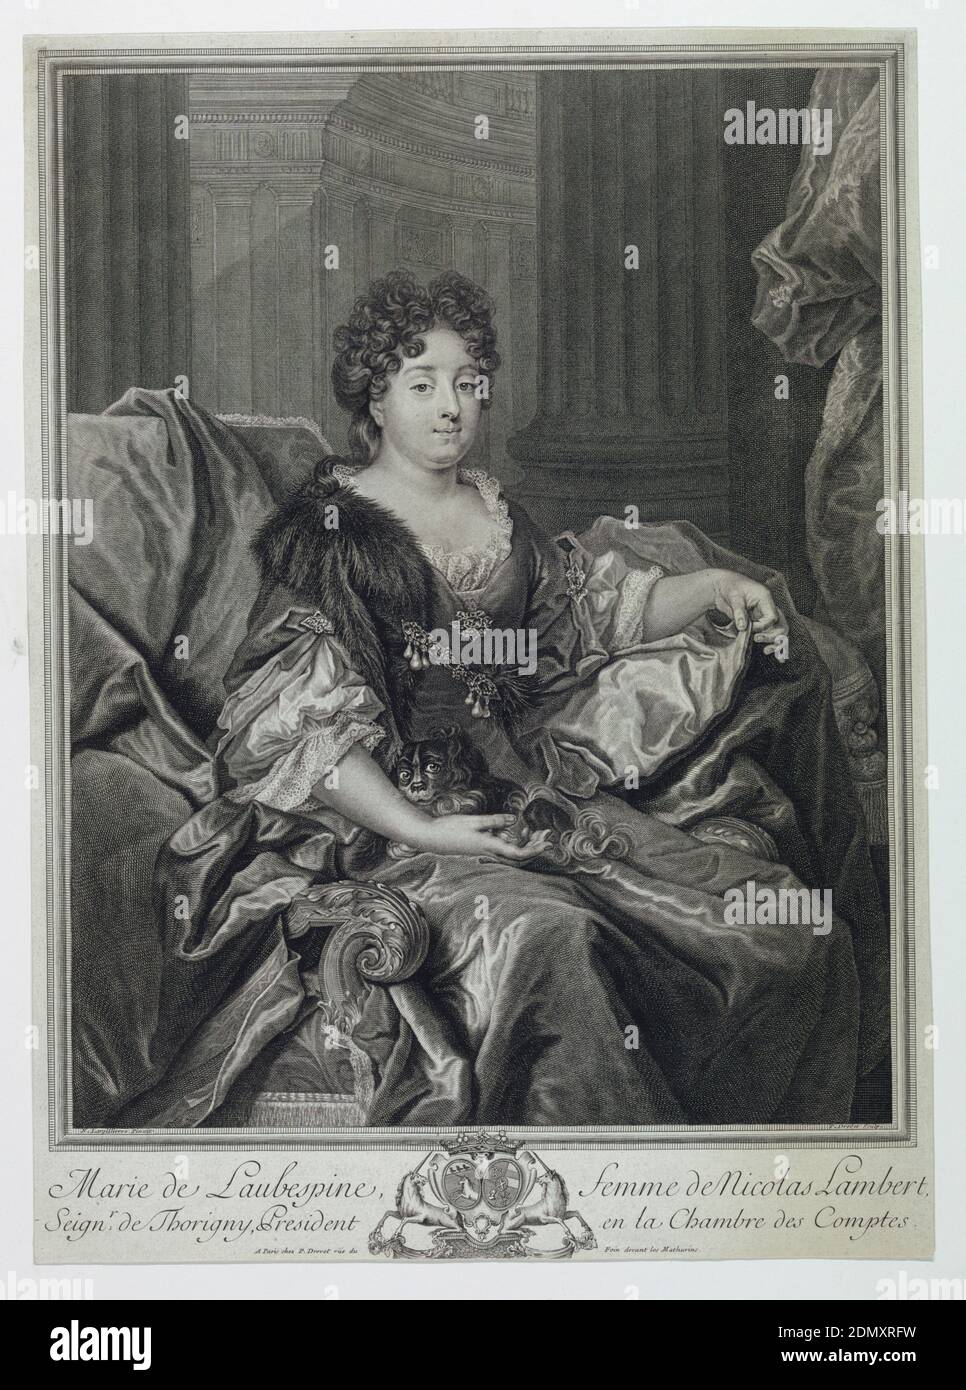 Portrait of Madame Lambert (Marie de Laubespine), Pierre Drevet, 1663 - 1738, Nicolas de Largillière, 1656 - 1746, Engraving on paper, Almost full length portrait of the young woman seated in an armchair. In three-quarter view to right. Dress has a décolleté neckline surrounded by lac. A part of the fur from her coat is over her right shoulder. She holds a dog in her lap. In background, columns, and a wall with pilasters. Inscribed, lower left: 'N. Largilliere pinxit'; lower right: 'P. Drevet Sculpt.'; lower margin: 'Marie de Laubespine, femme de Nicolas Lambert; / Seign^r. de Thorigny Stock Photo